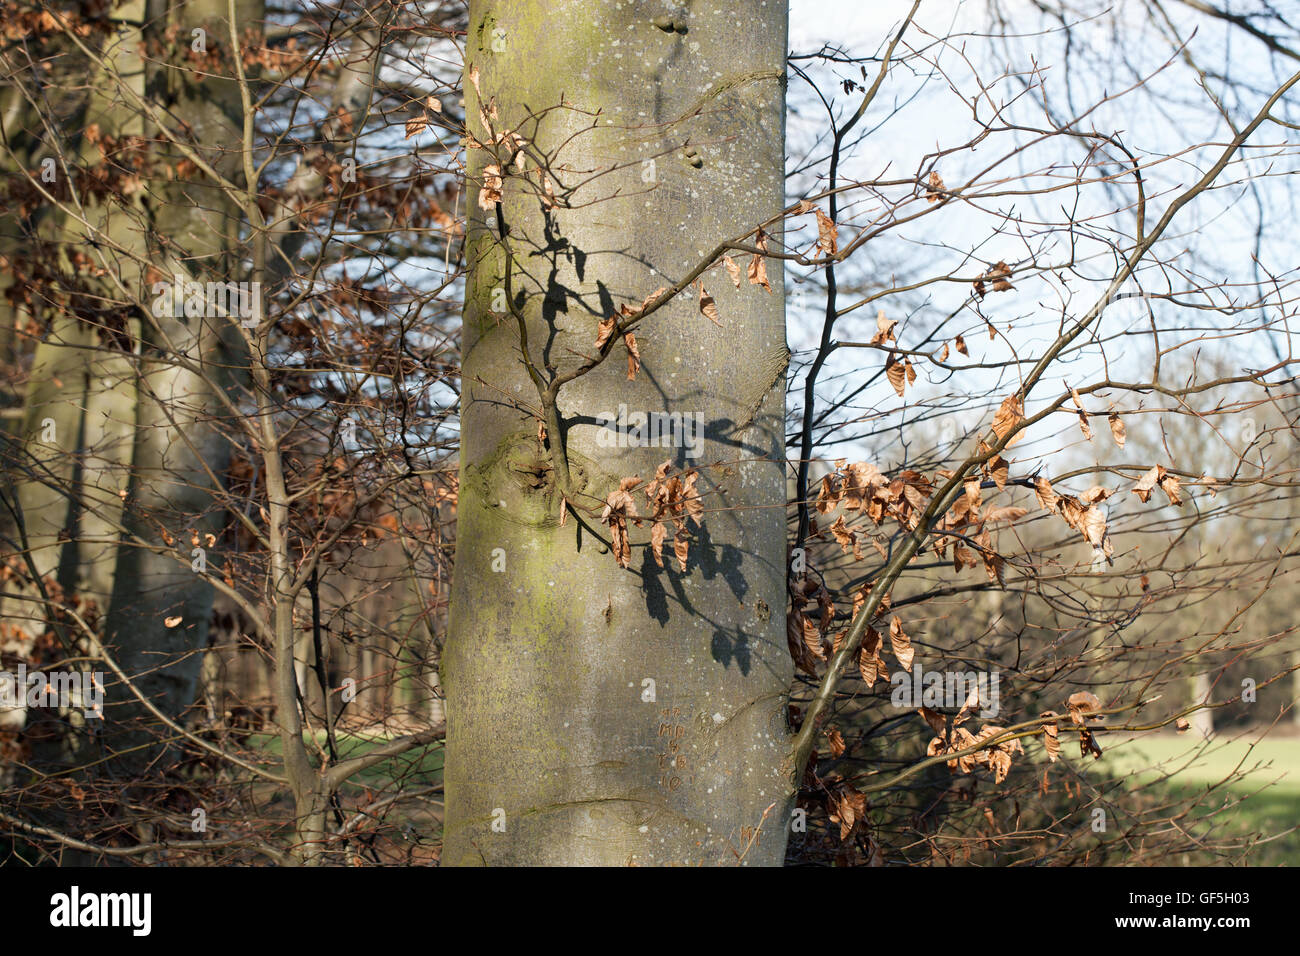 Common Beech Tree (Fagus sylvatica). Standing tree, showing smooth grey trunk. Dead leaves still attached to lower branches from Stock Photo